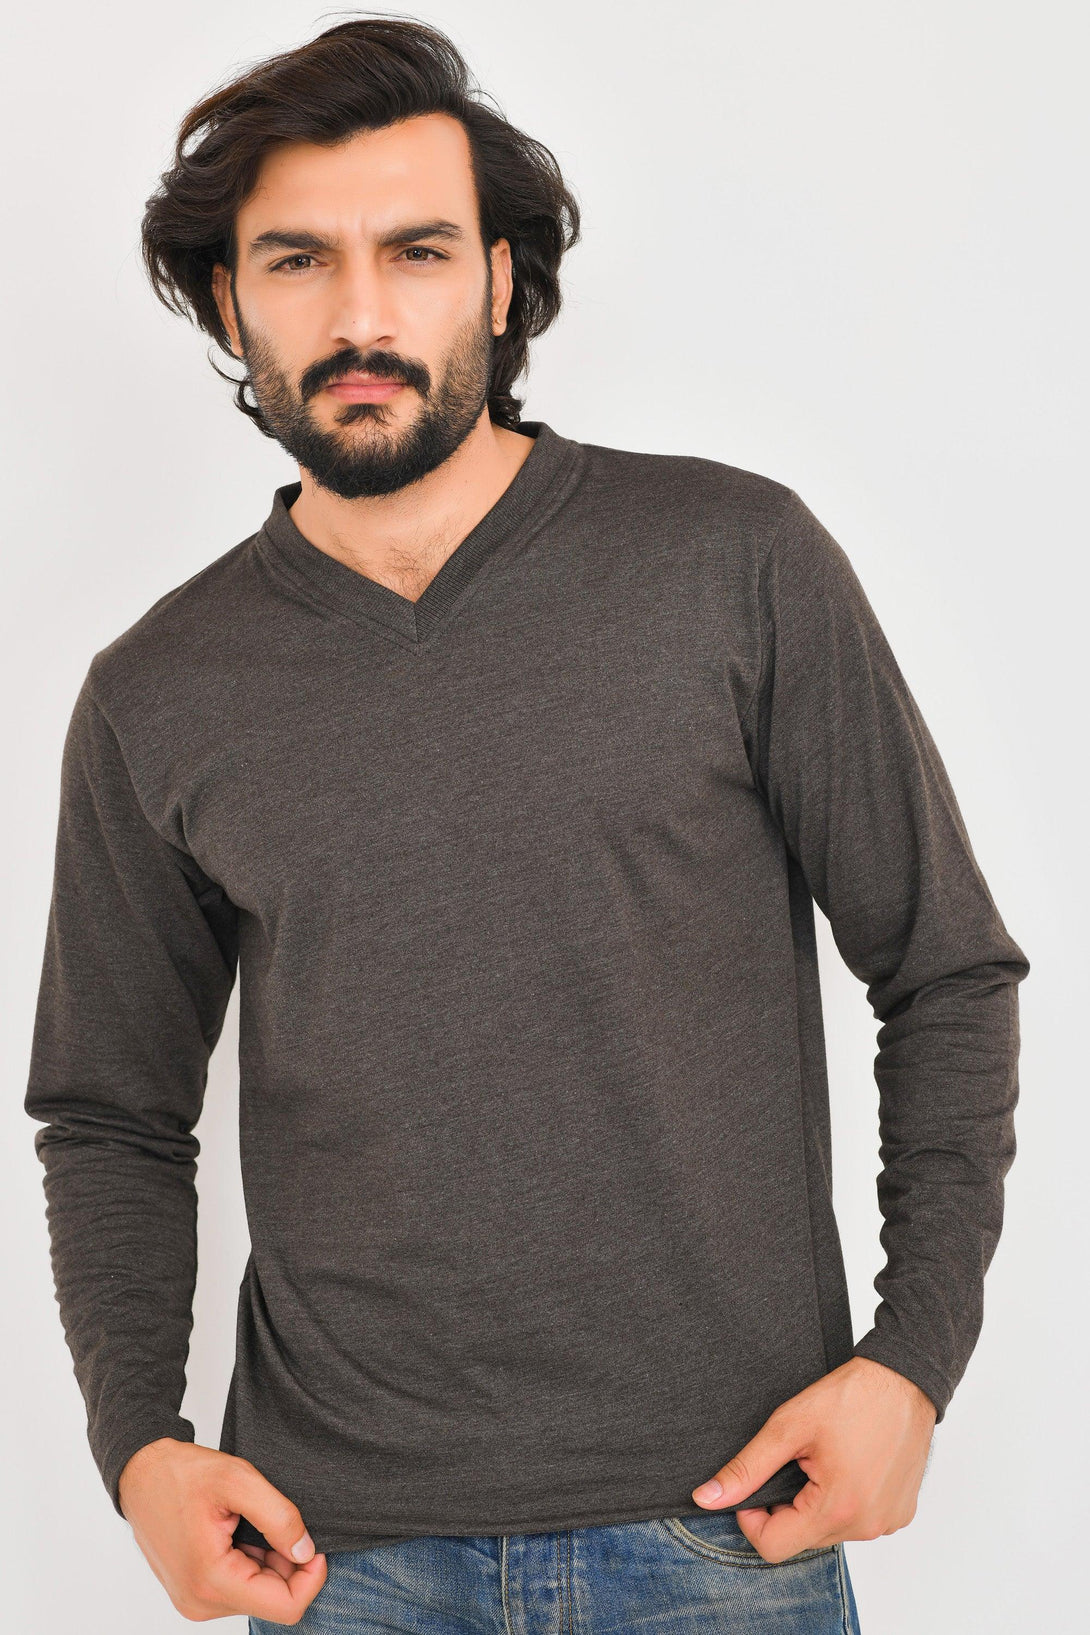 V-Neck Long Sleeve T-Shirts GREY - CHARCOAL - CHOCOLATE - MUSTARD - Pack of 4 - FTS